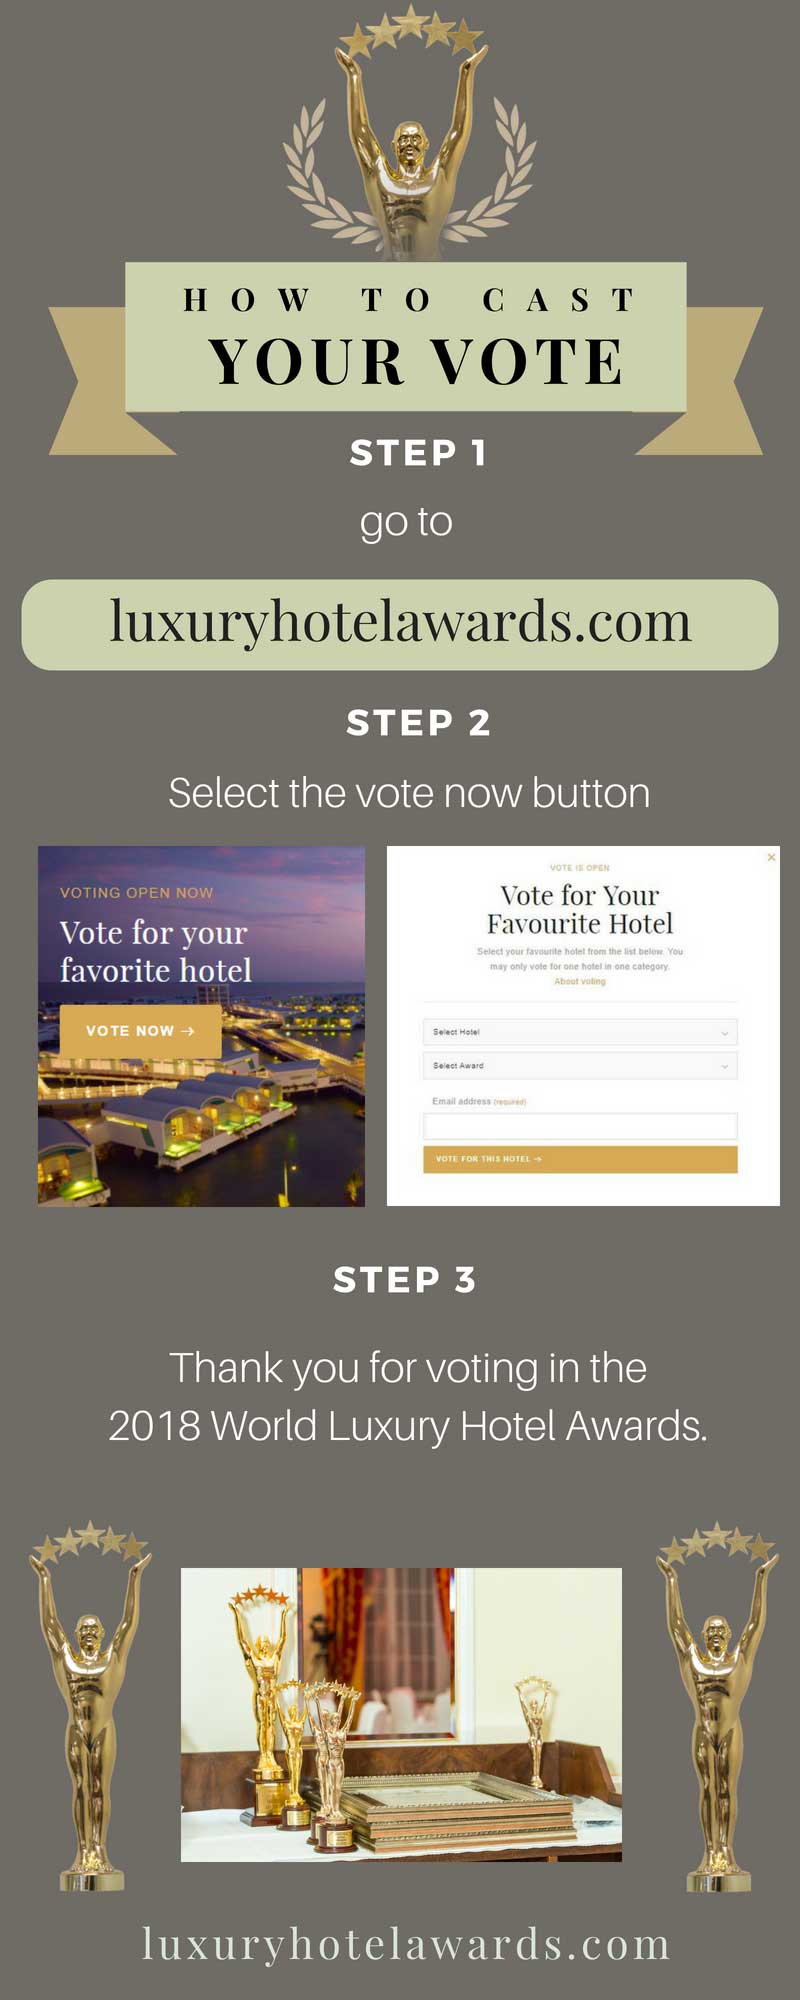 17-How-to-cast-your-vote-Luxury-Hotel-Awards